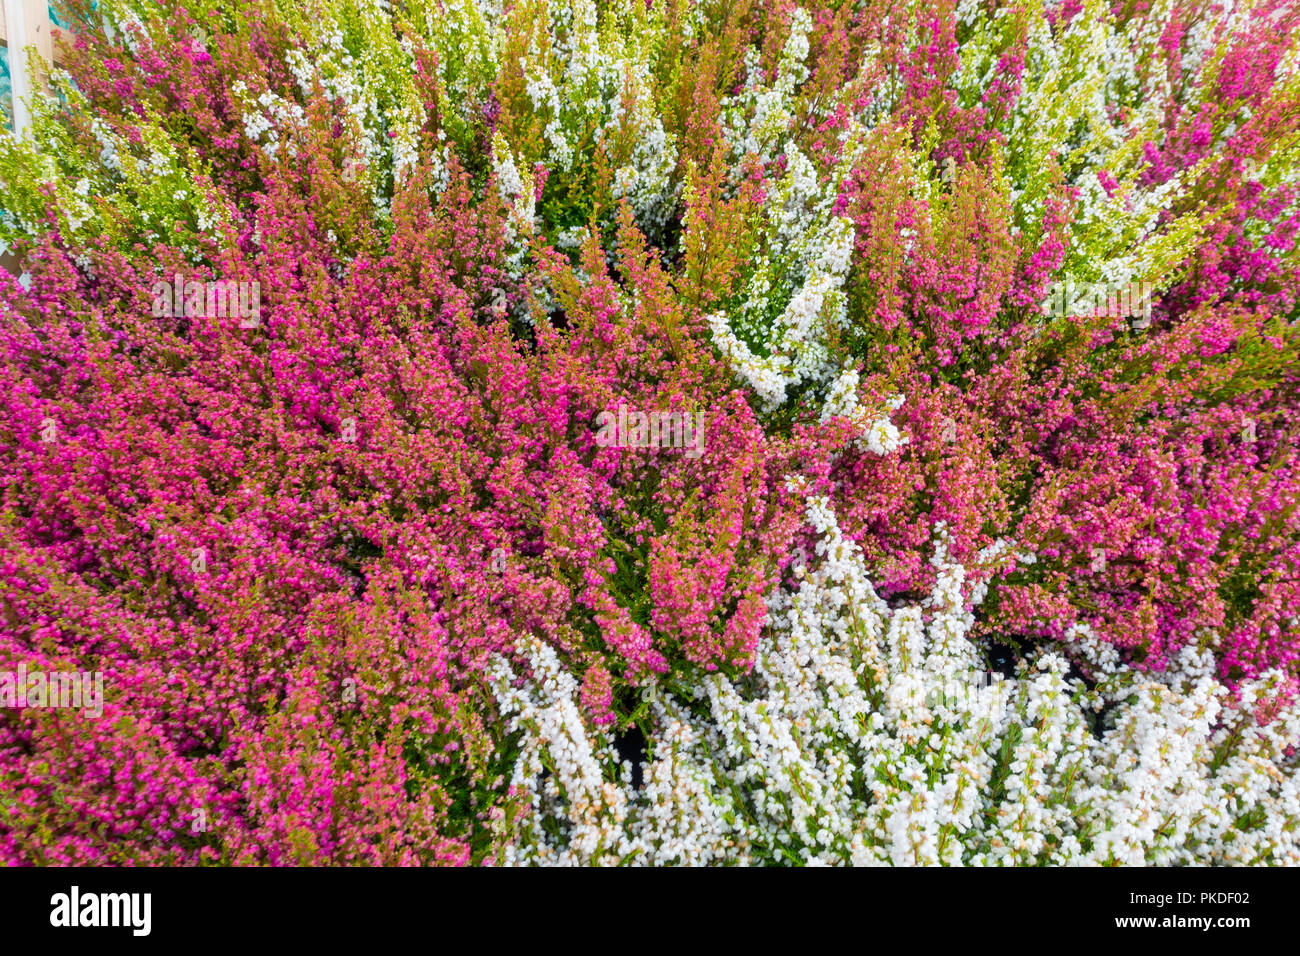 Mass of purple and white heather plants without labels in a garden centre Stock Photo